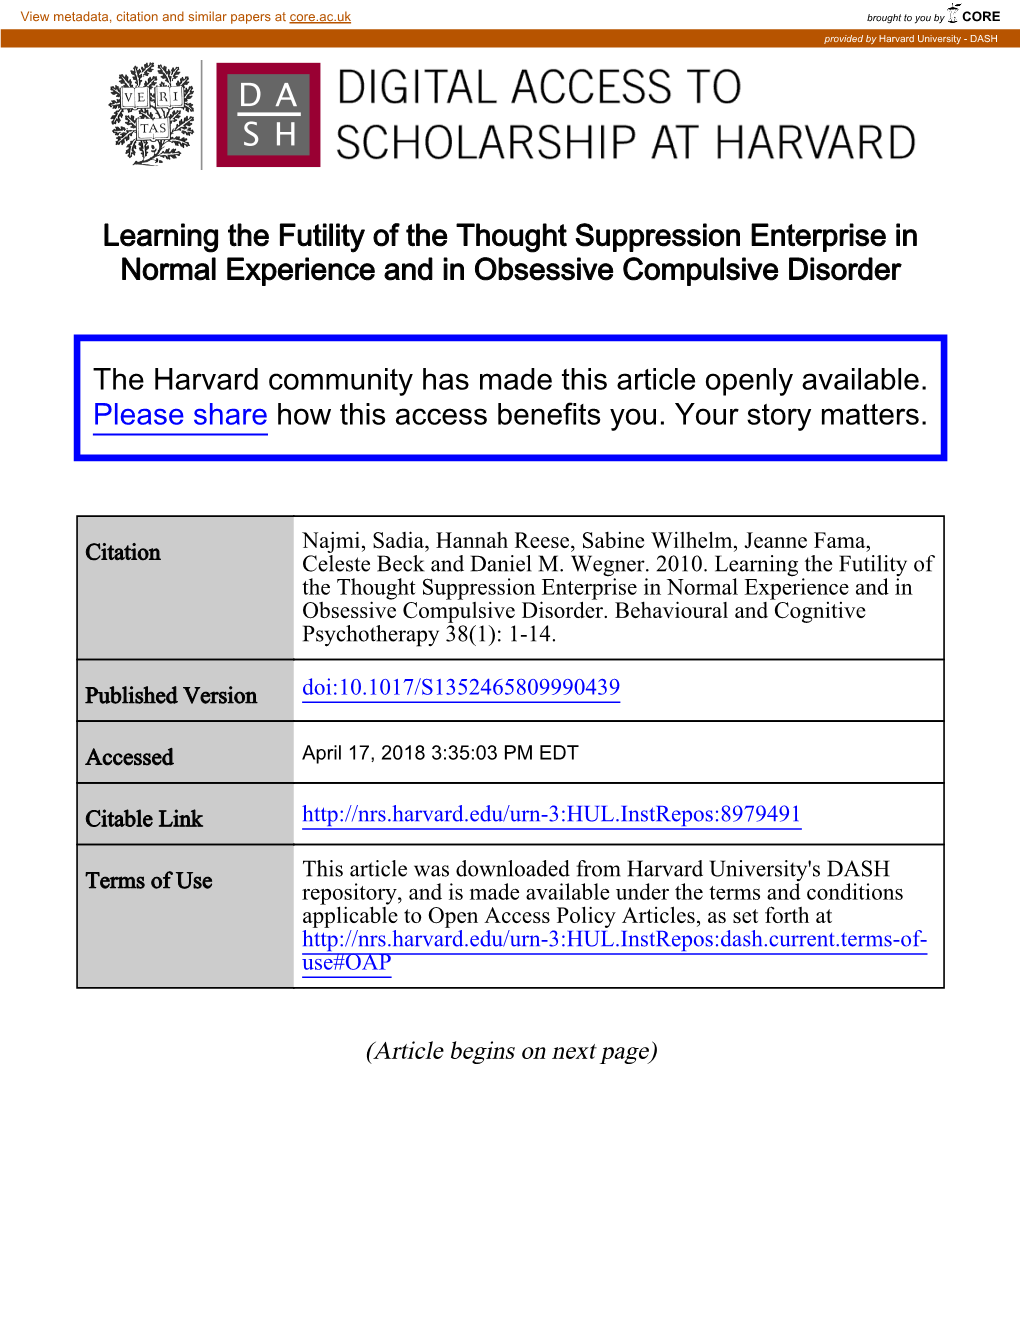 Learning the Futility of the Thought Suppression Enterprise in Normal Experience and in Obsessive Compulsive Disorder the Harvar